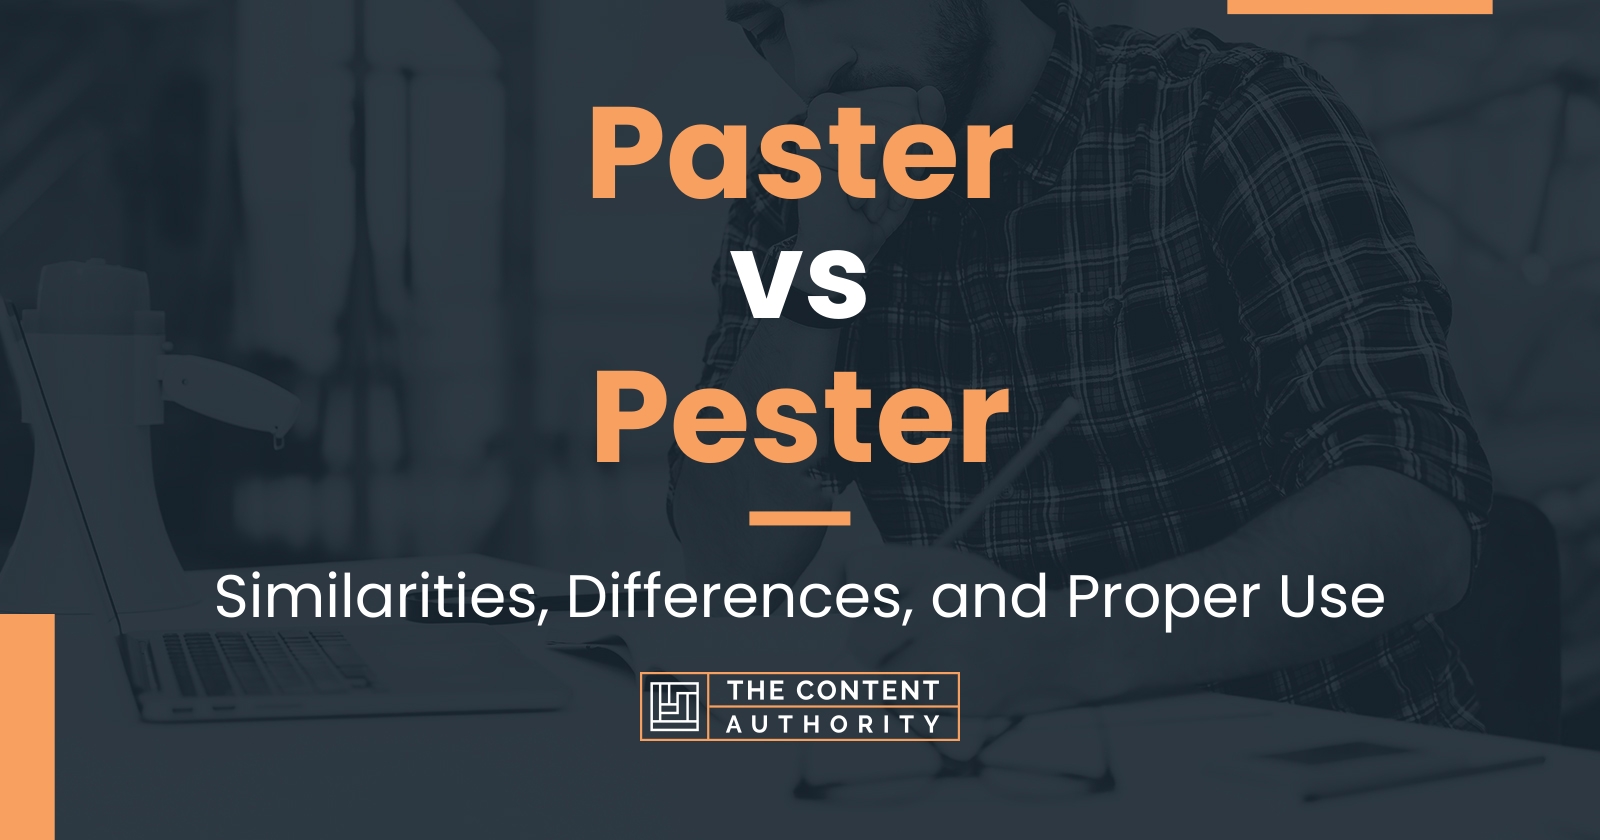 Paster vs Pester: Similarities, Differences, and Proper Use